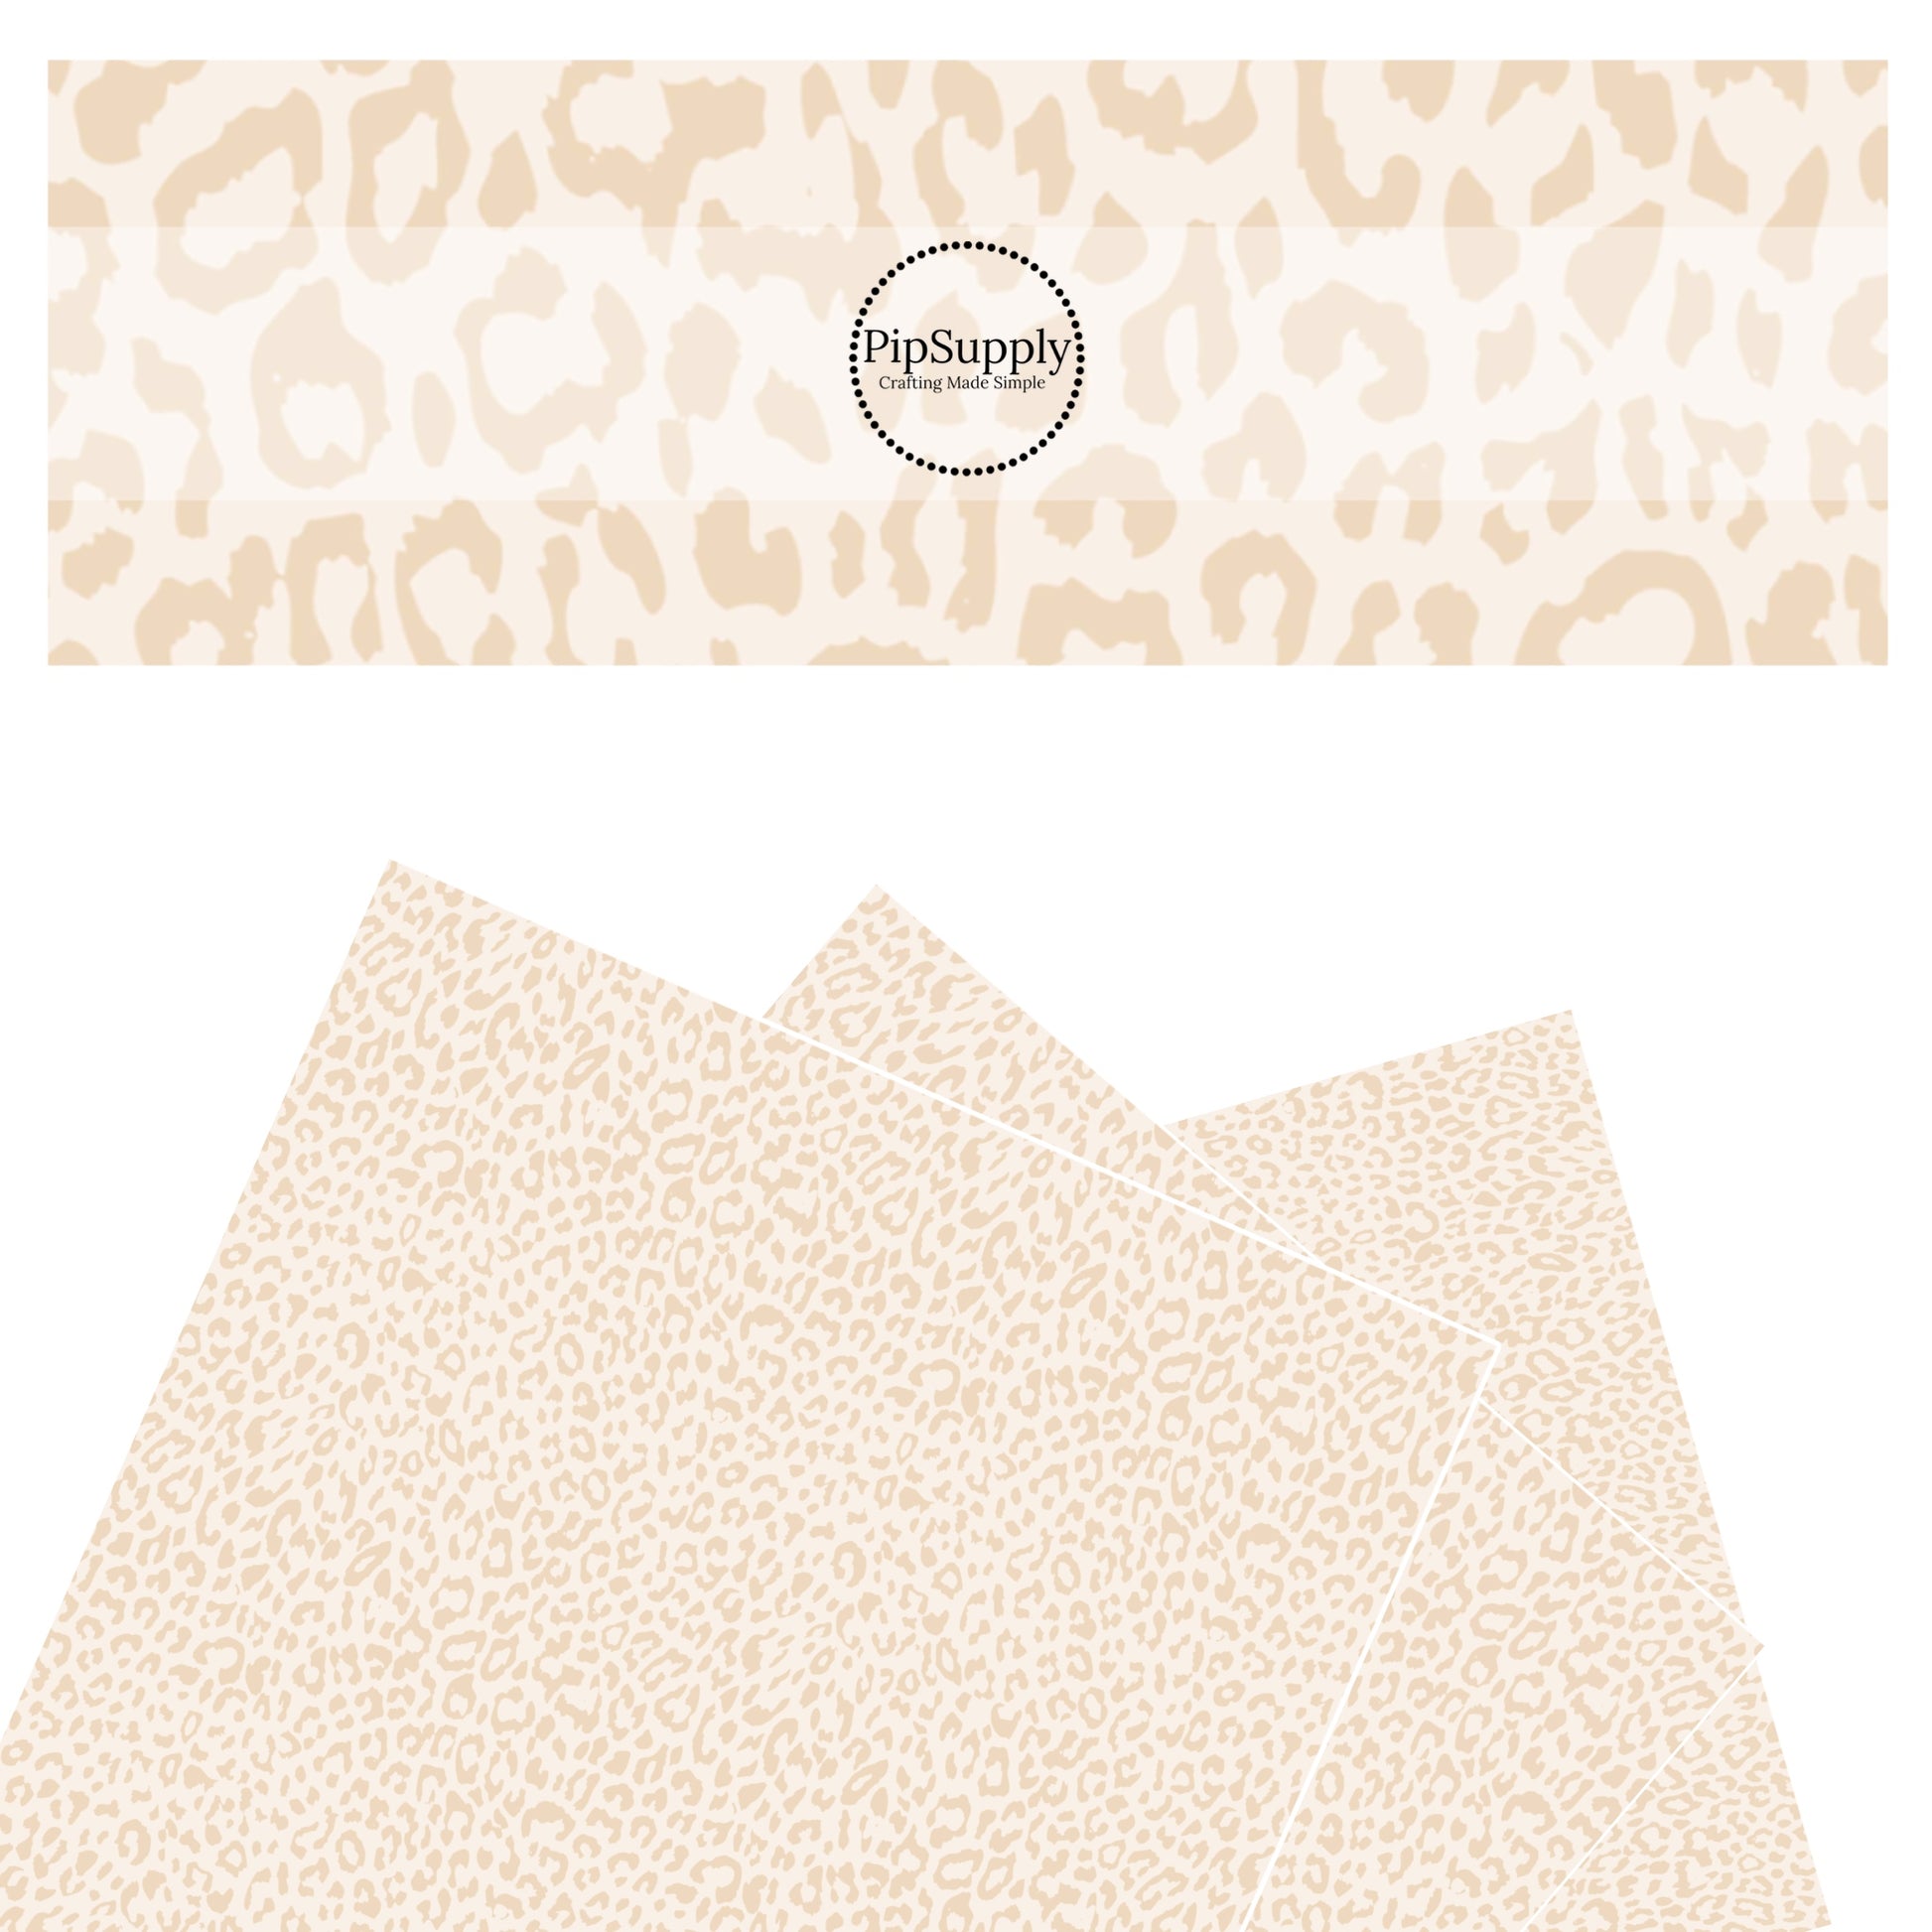 These classic leopard pattern themed faux leather sheets contain the following design elements: cream colored leopard print. Our CPSIA compliant faux leather sheets or rolls can be used for all types of crafting projects.